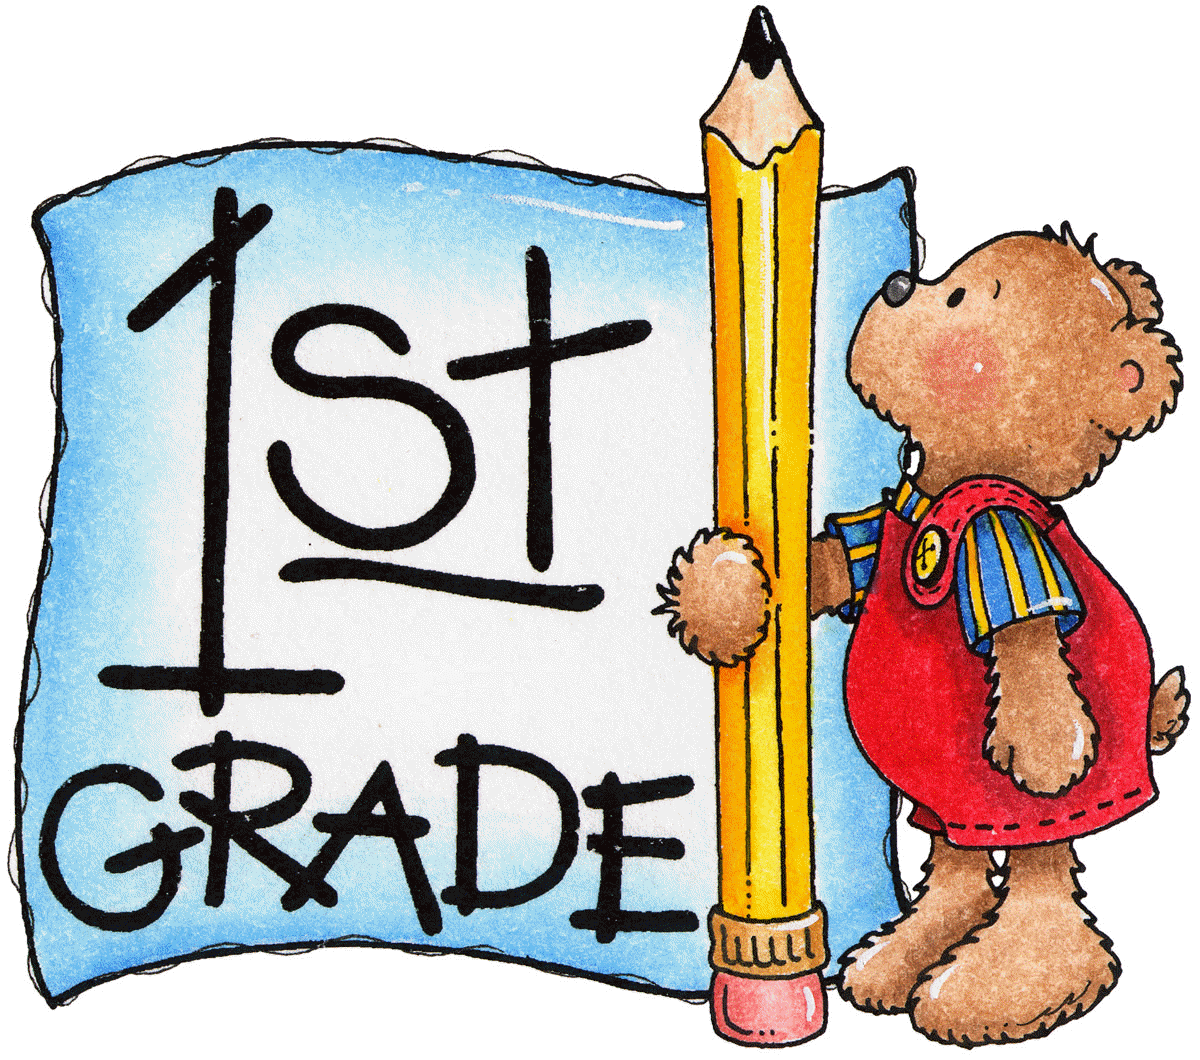 1ST GRADE - AN IMAGE OF A BEAR WITH A PENCIL